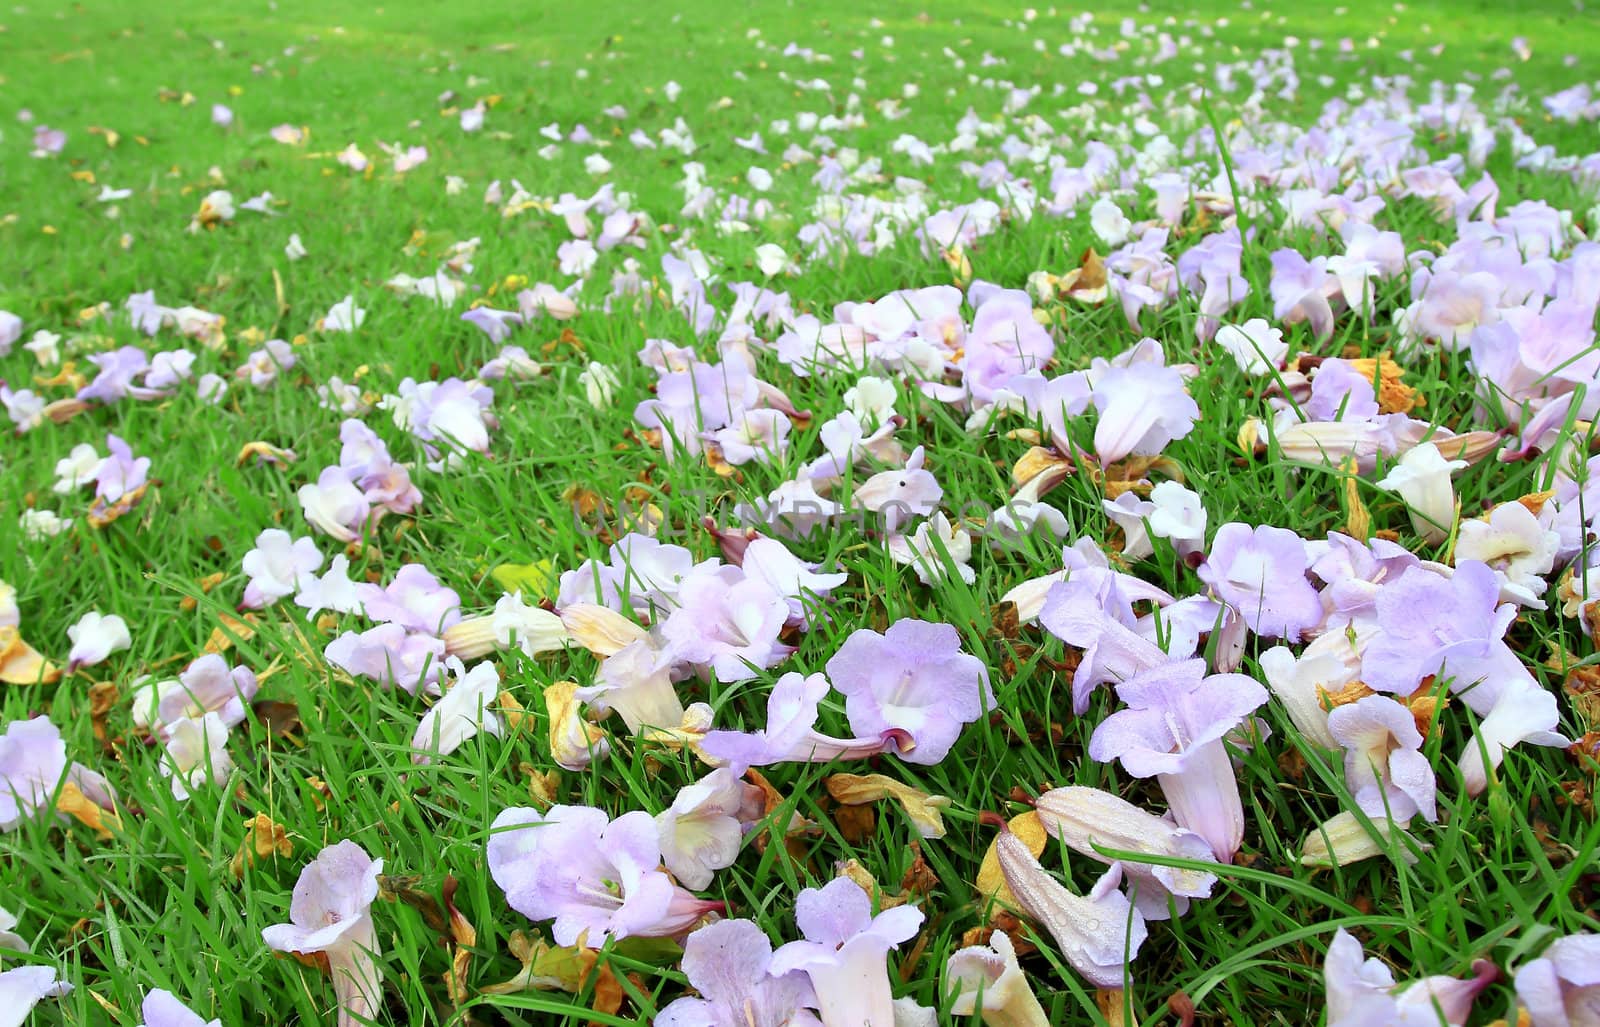 purple and white crocus field with grass in spring time 
 by rufous